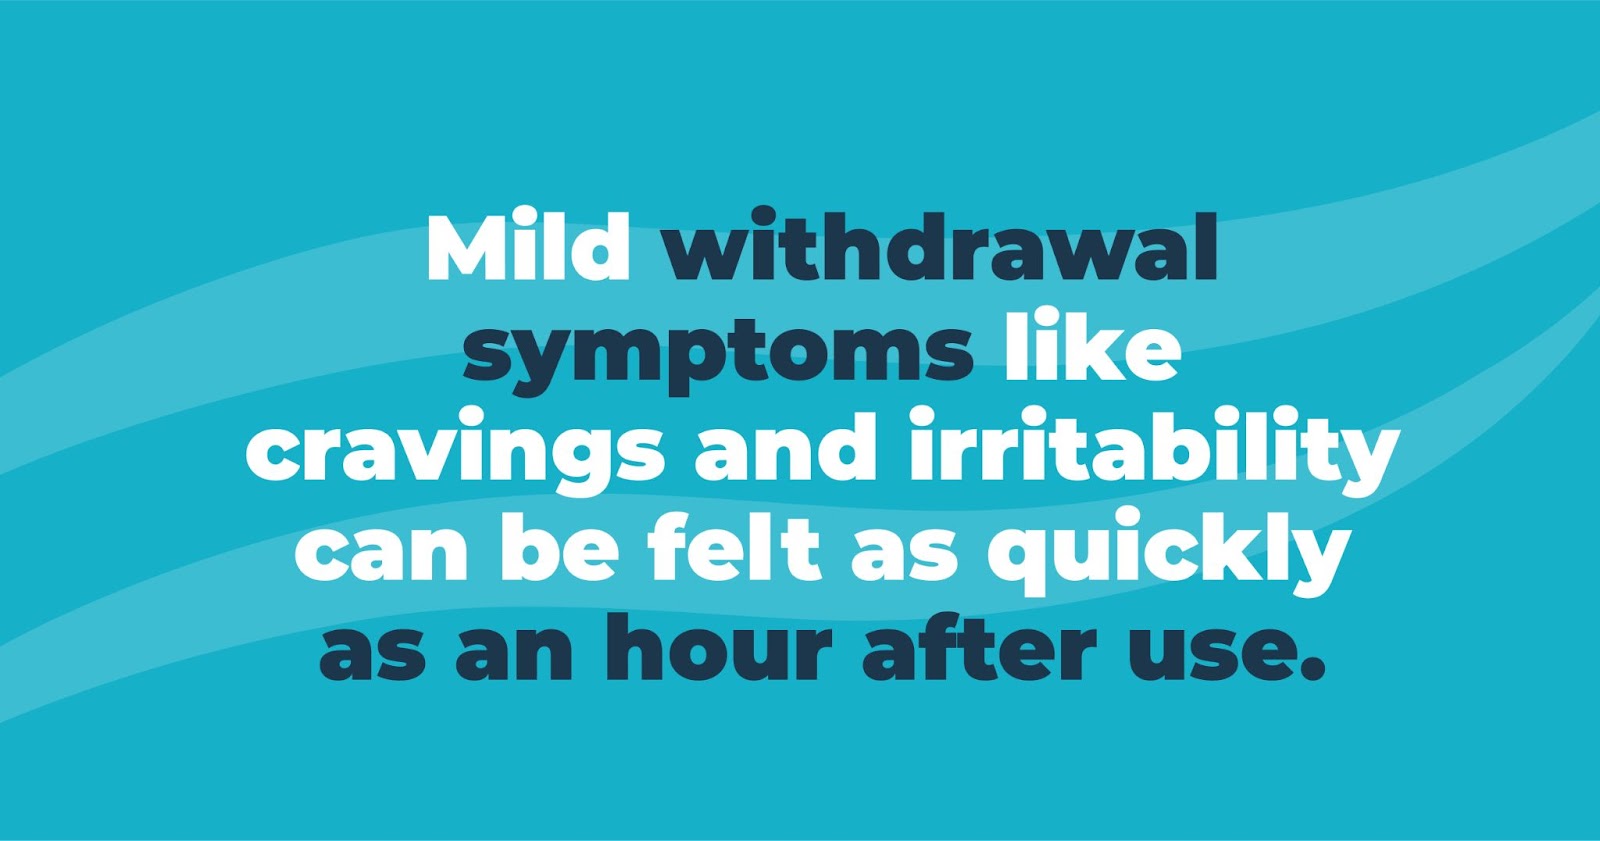 mild withdrawal symptoms like cravings and irritability can be felt as quickly as an hour after use